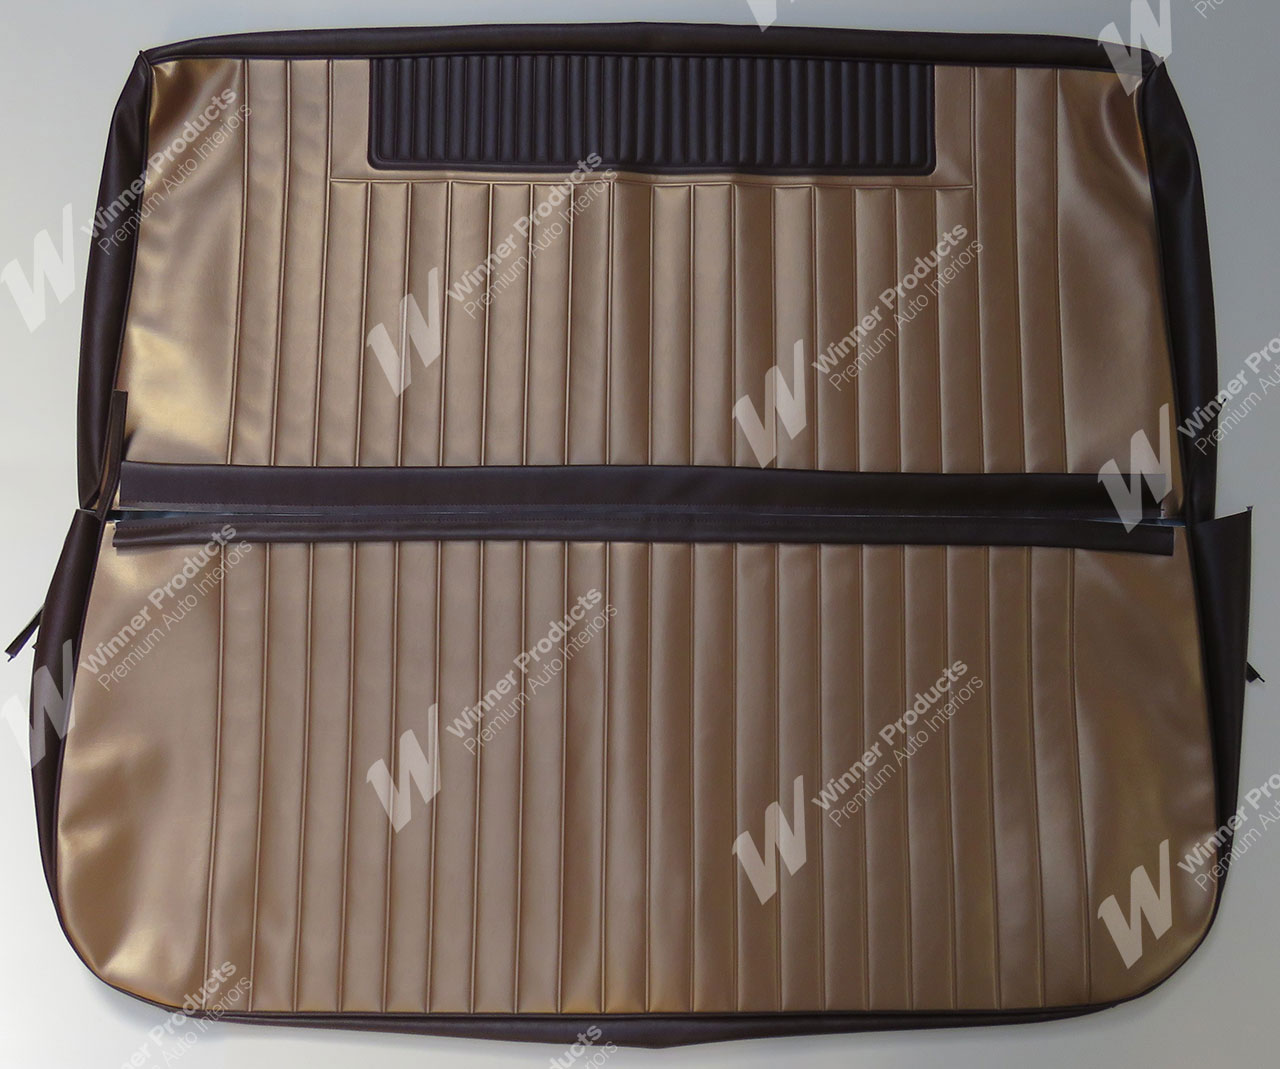 Holden Special EH Special Wagon C42 Aztec Gold & Jamboree Brown Seat Covers (Image 1 of 4)